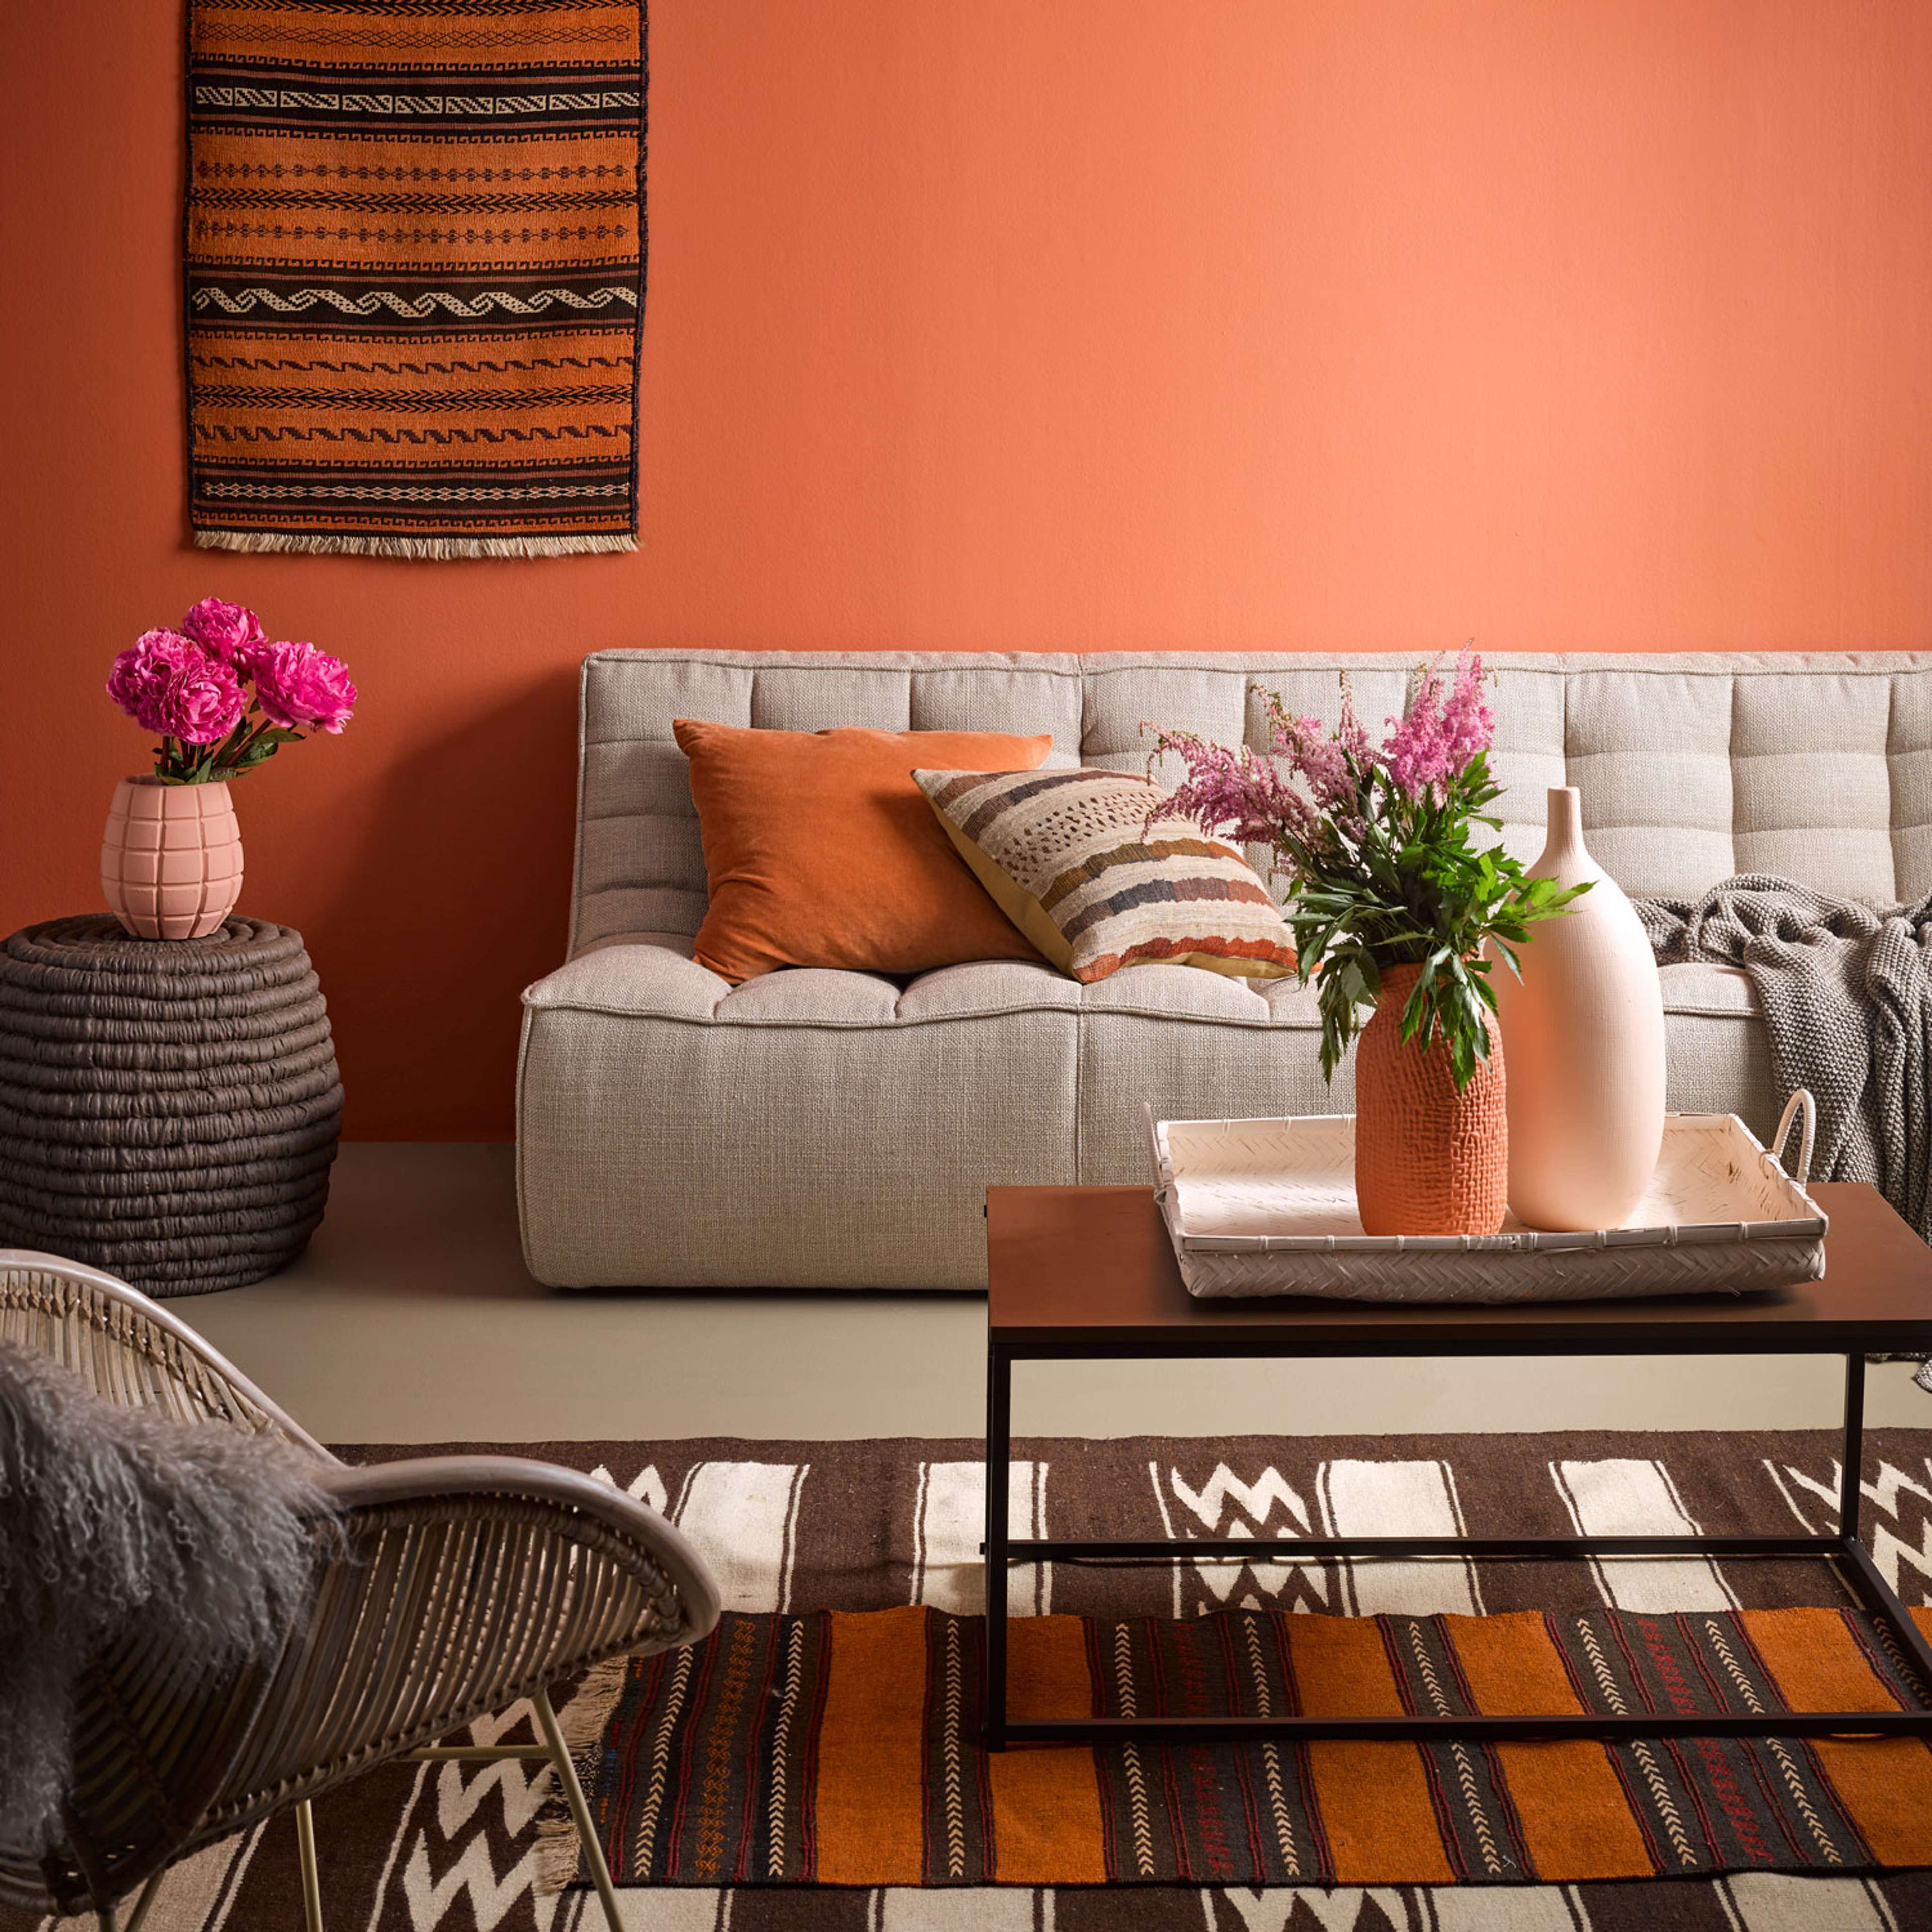 Back to Earth: How to Decorate with Terracotta